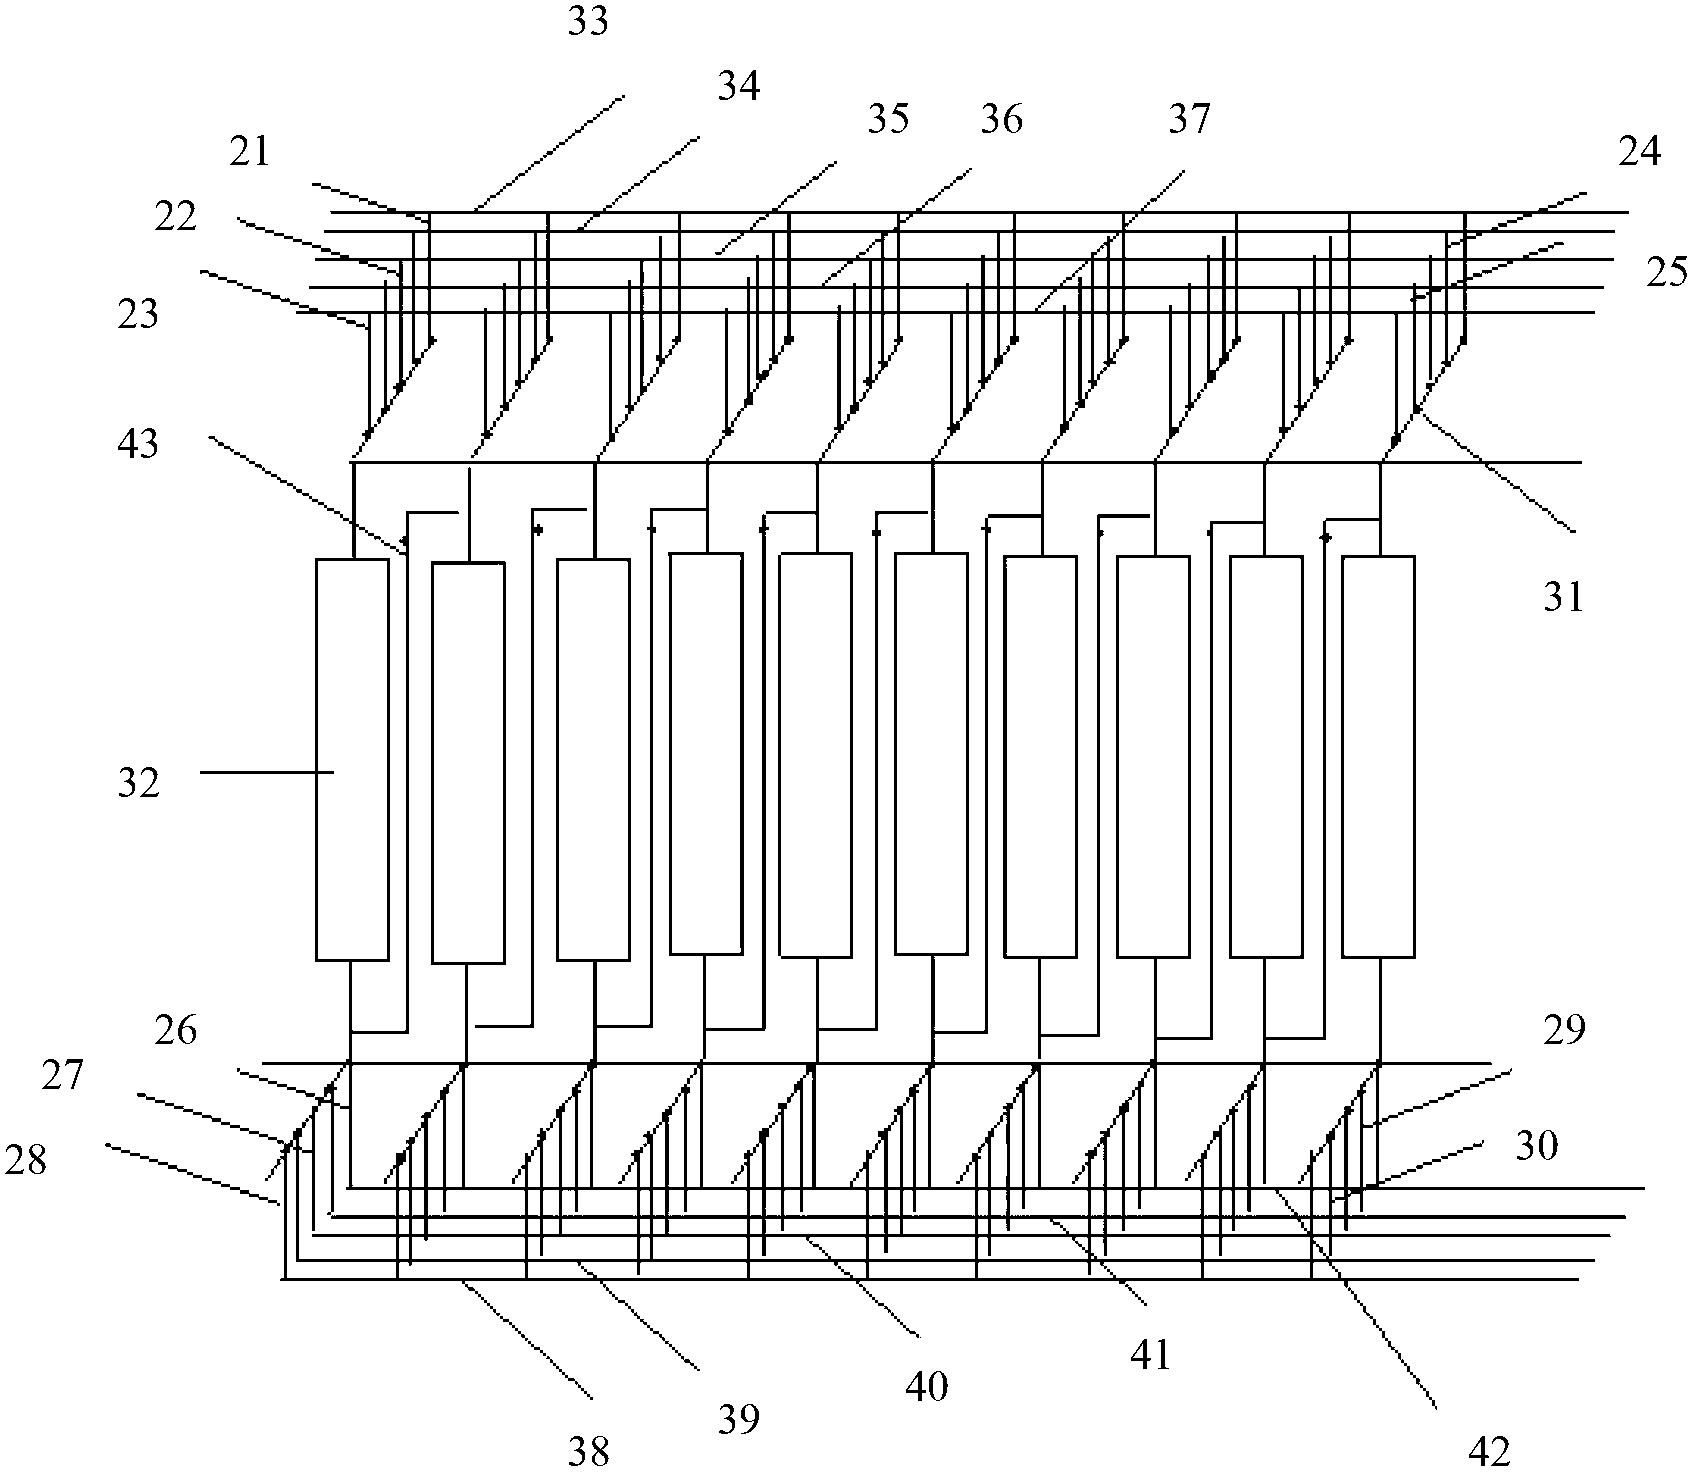 Continuous ion exchange device and method for removing boron from salt lake magnesium chloride brine